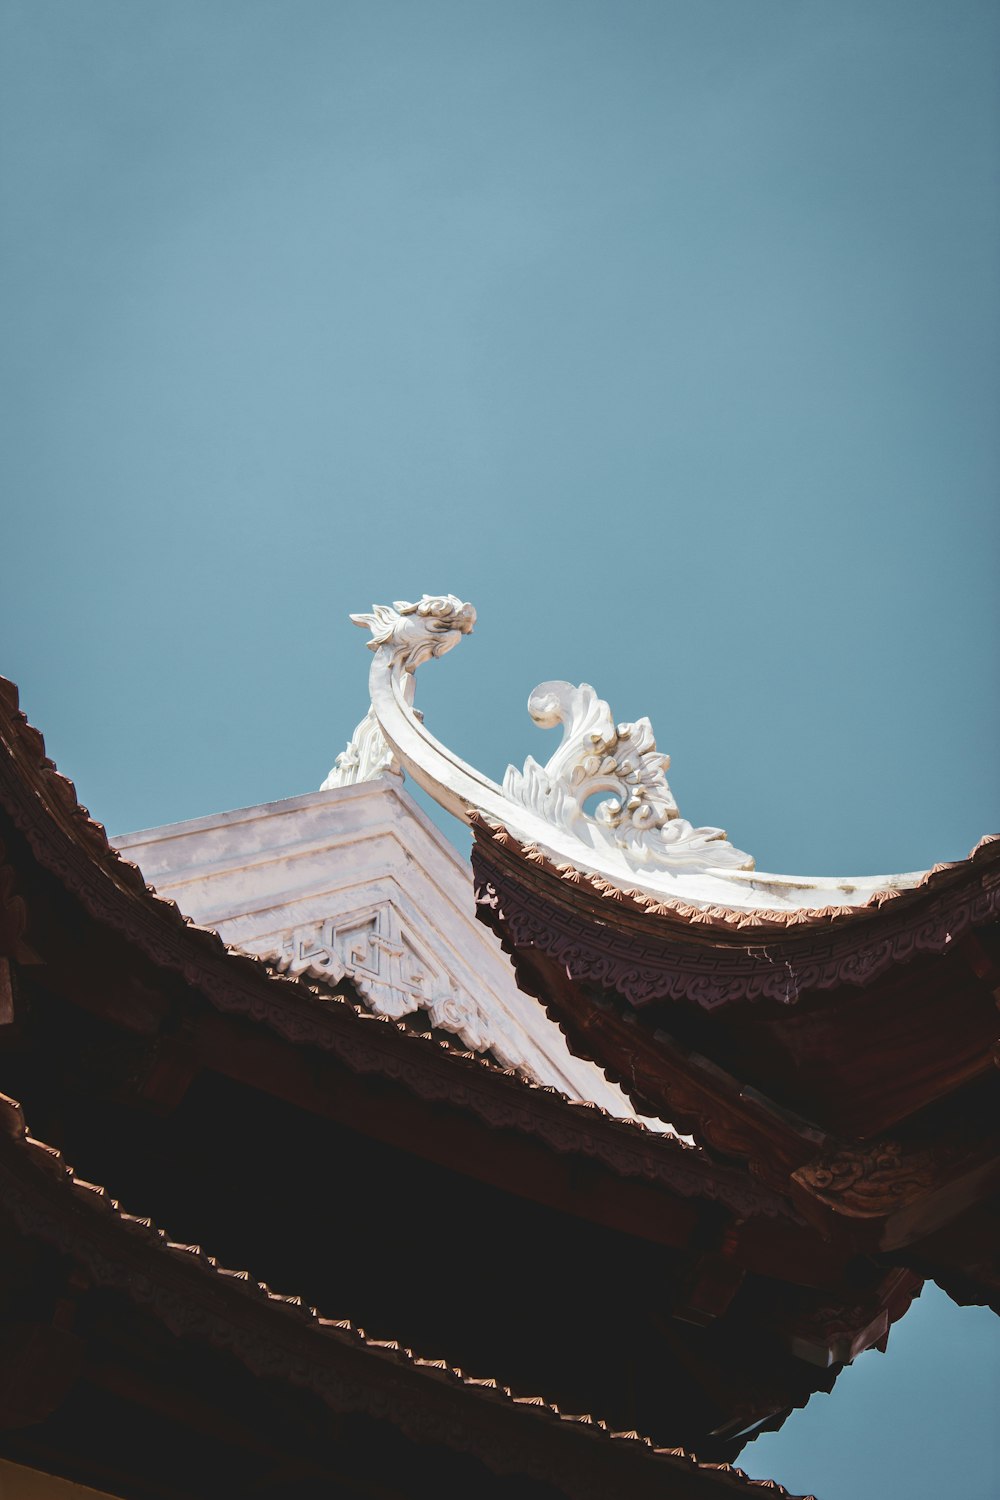 the roof of a building with a dragon decoration on it